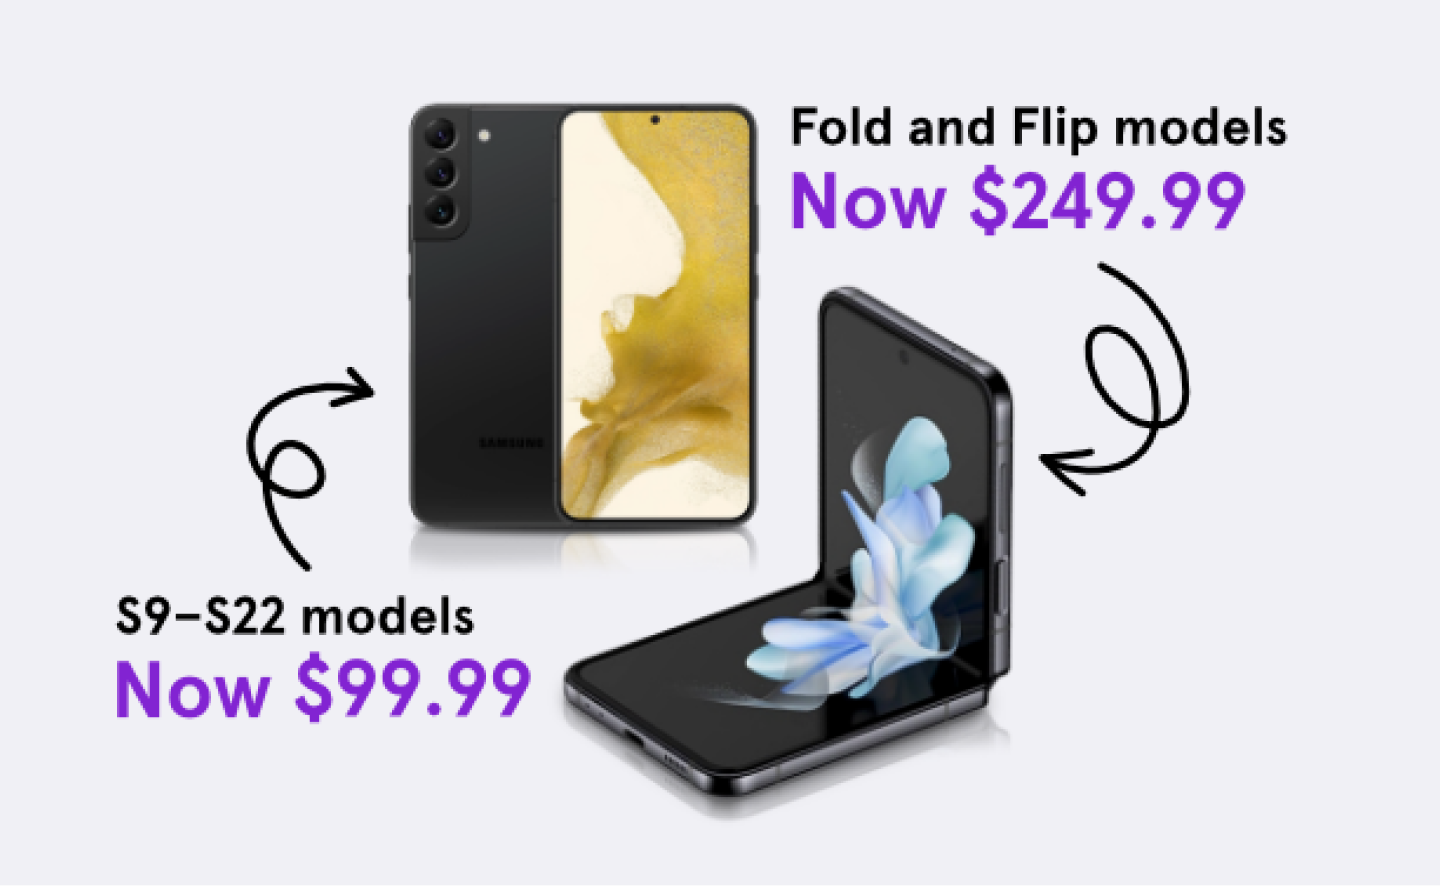 S9-S22 models now $99.99. Fold and Flip models now $249.99.